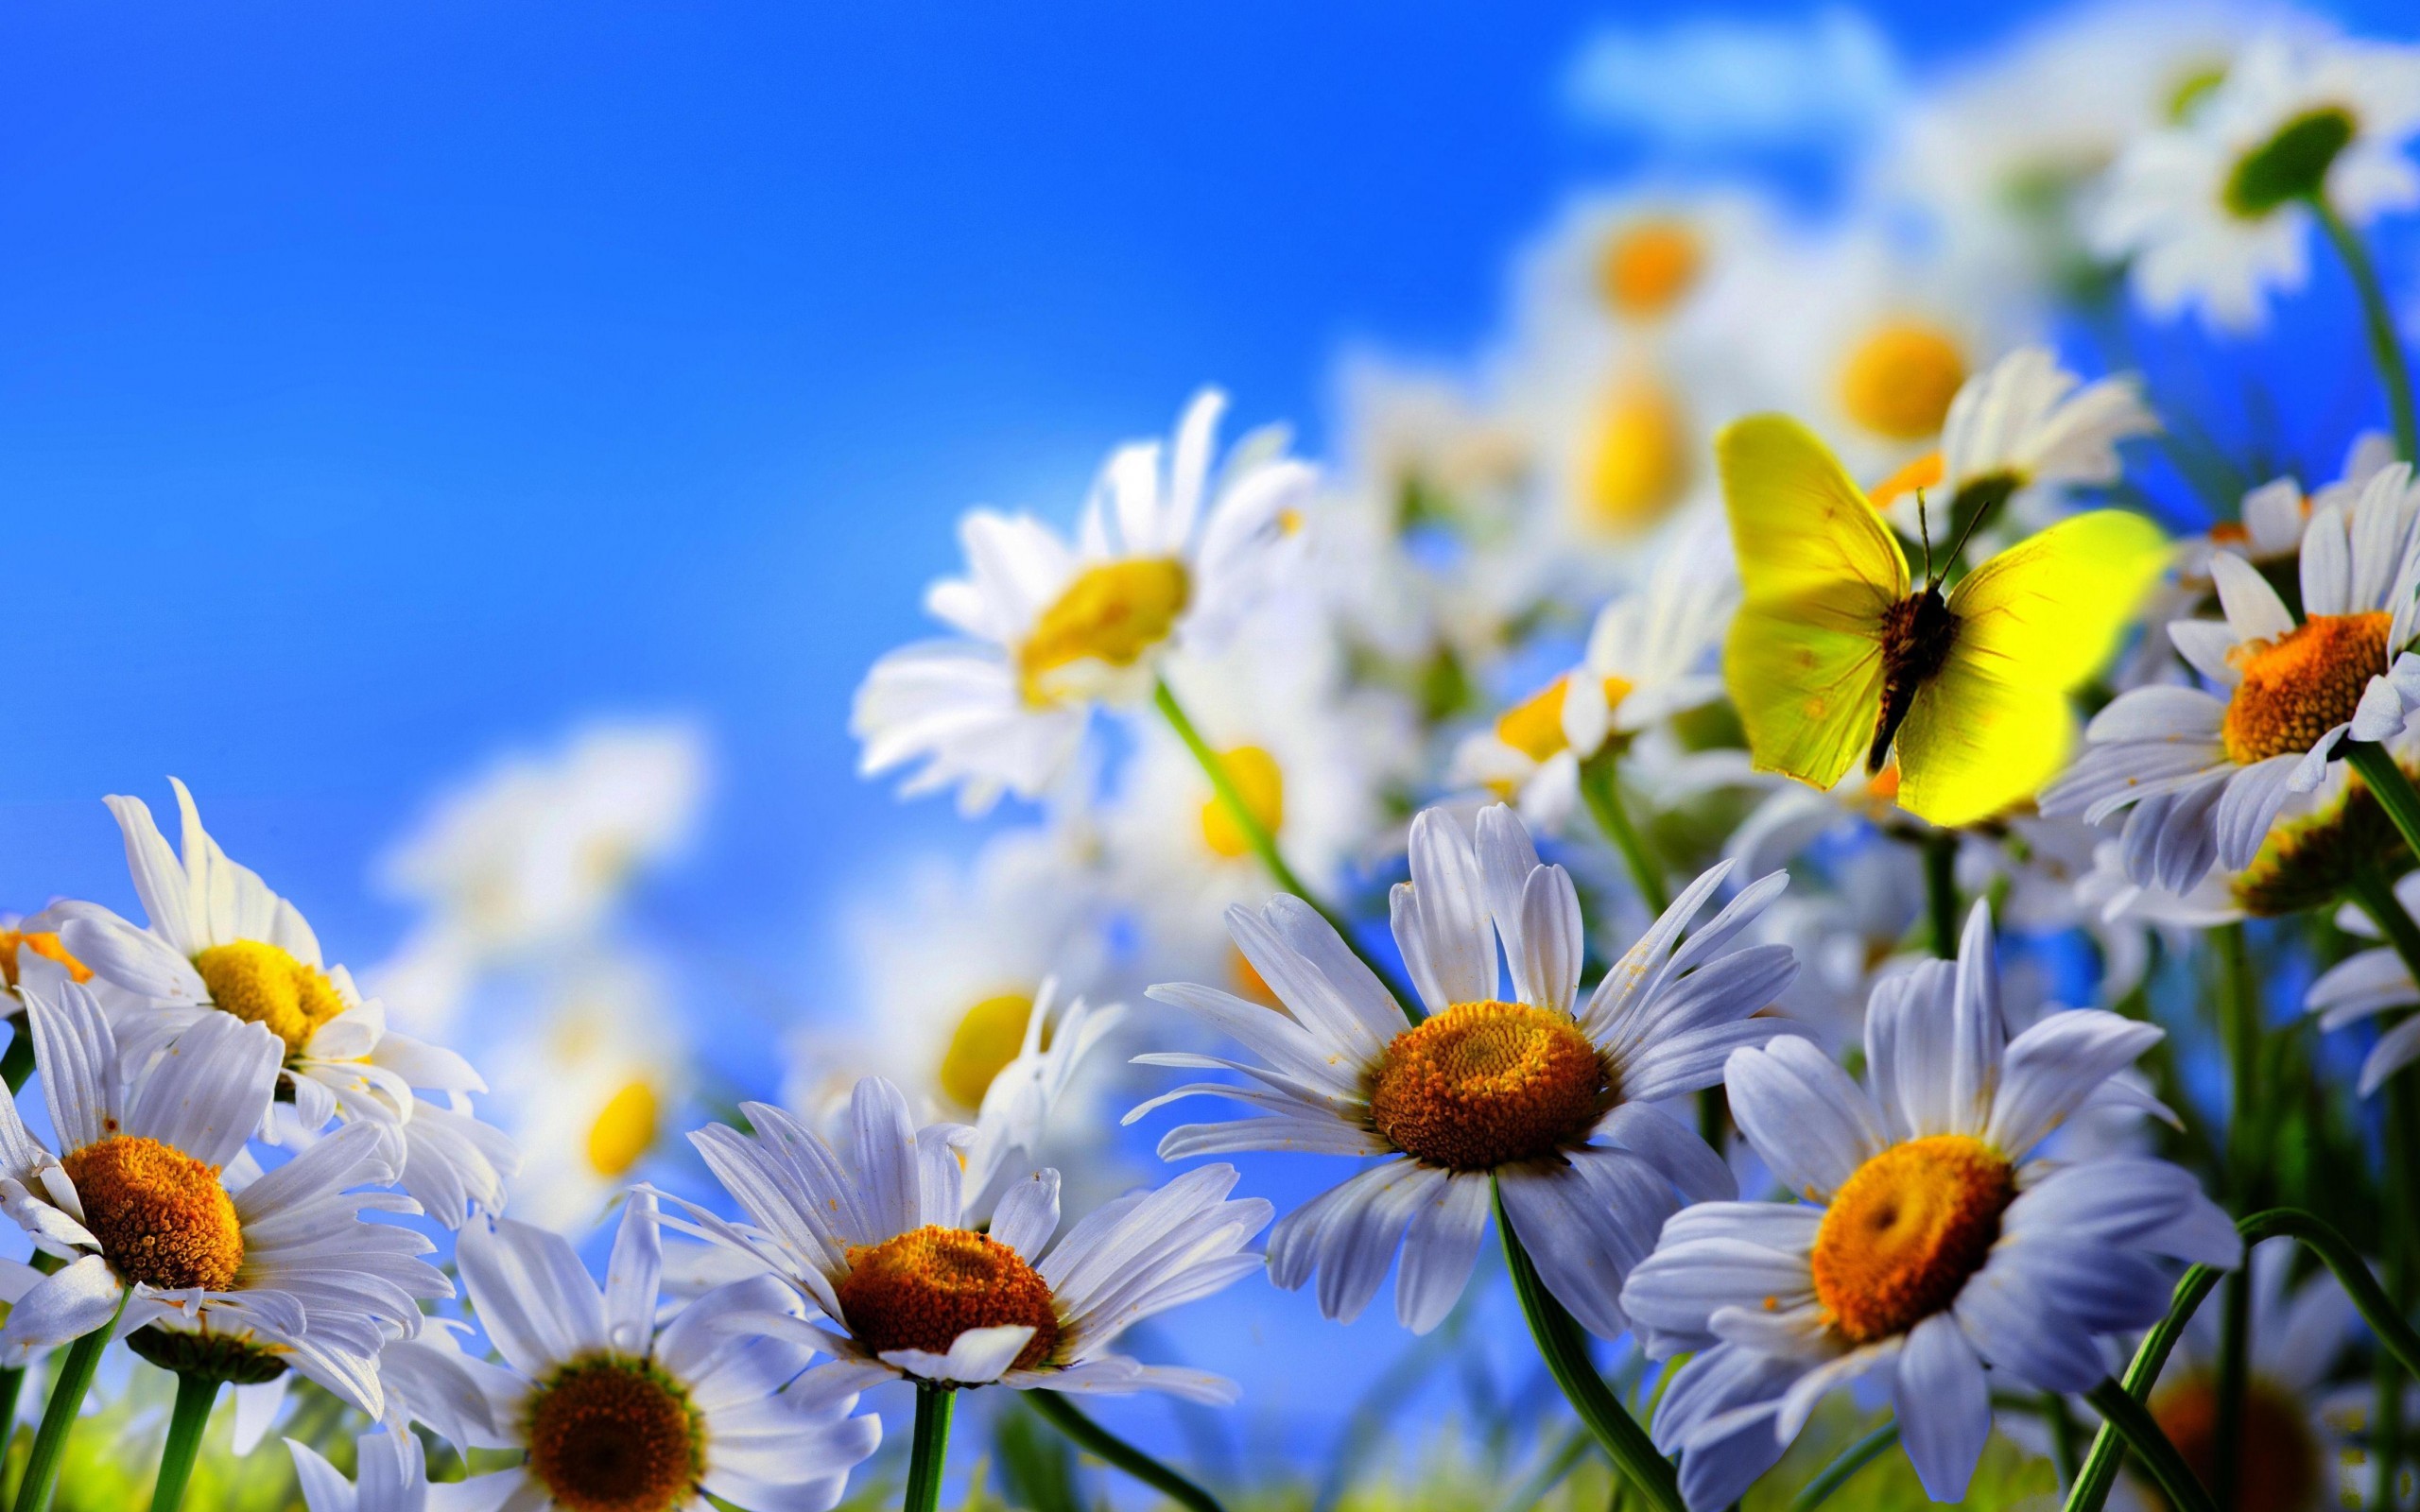 blue, butterflies, insects, flowers, plants, camomile